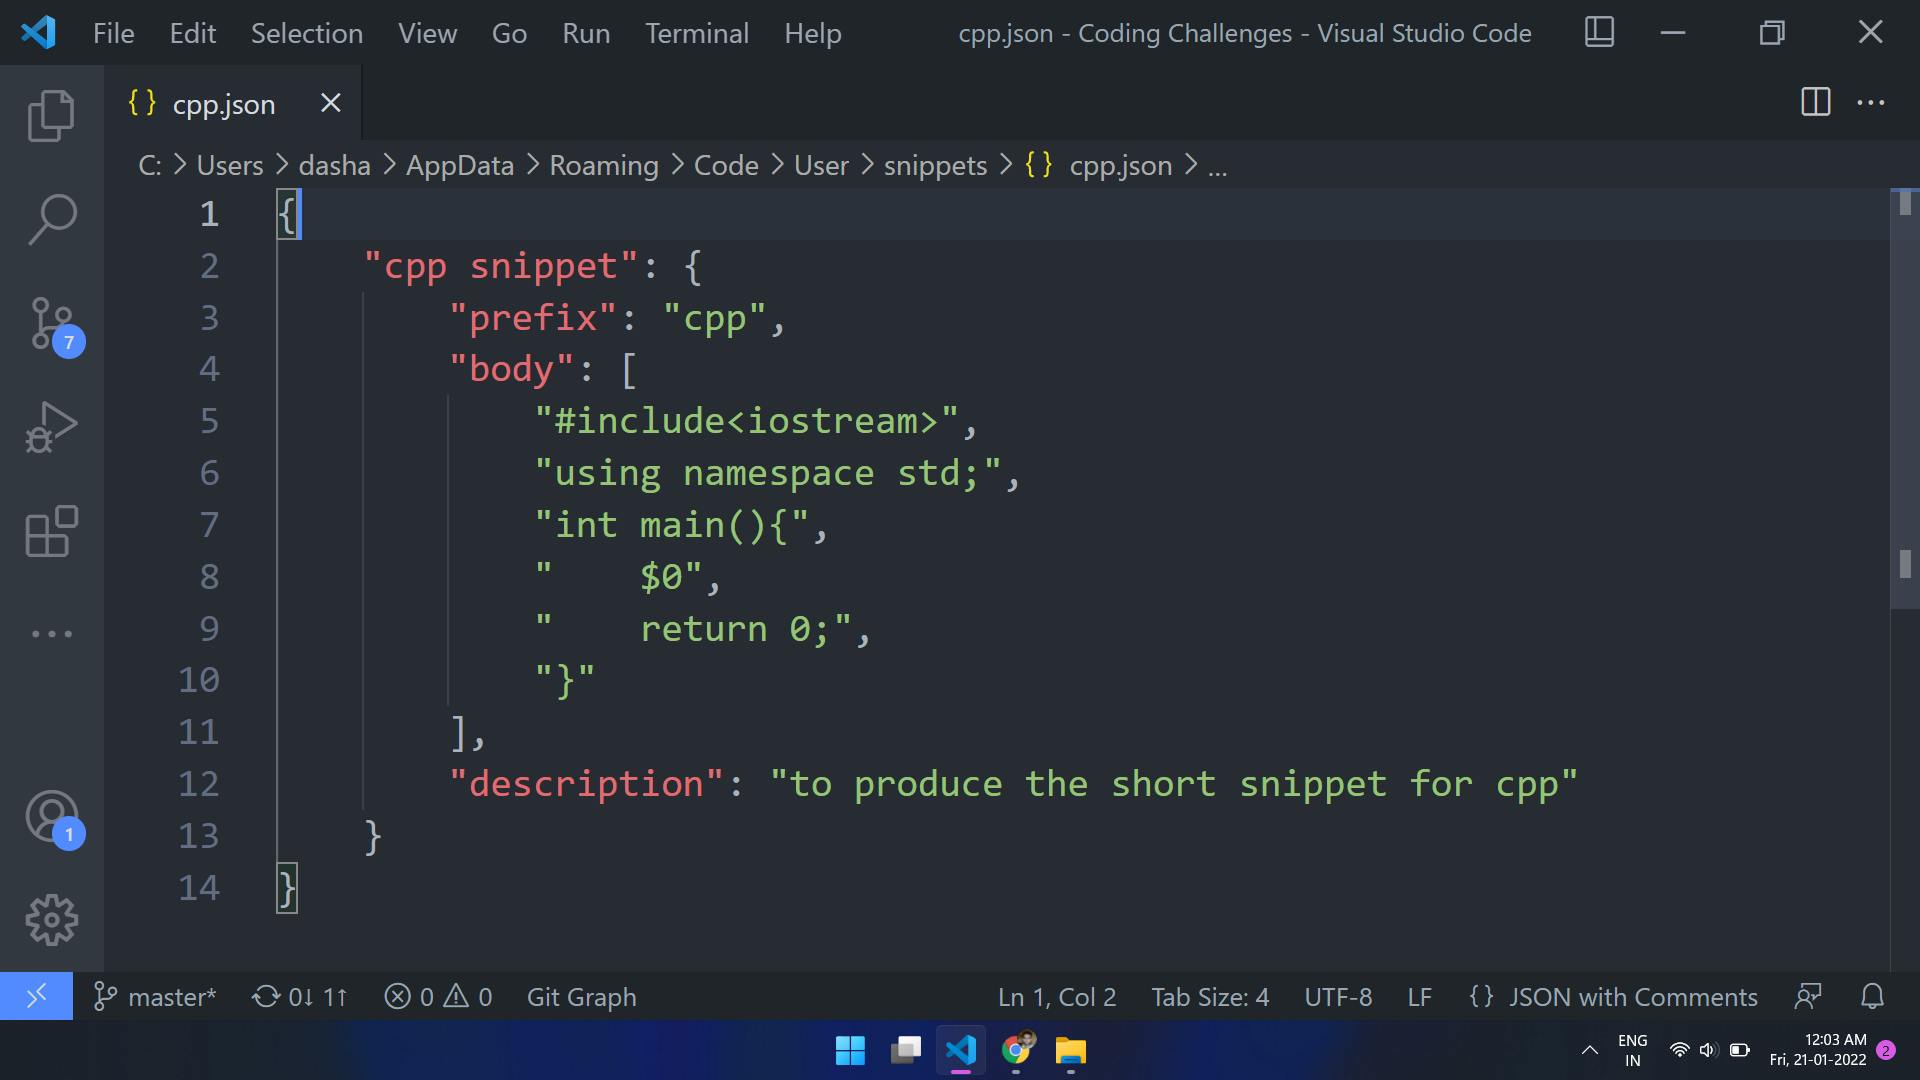 final code snippet should look like this